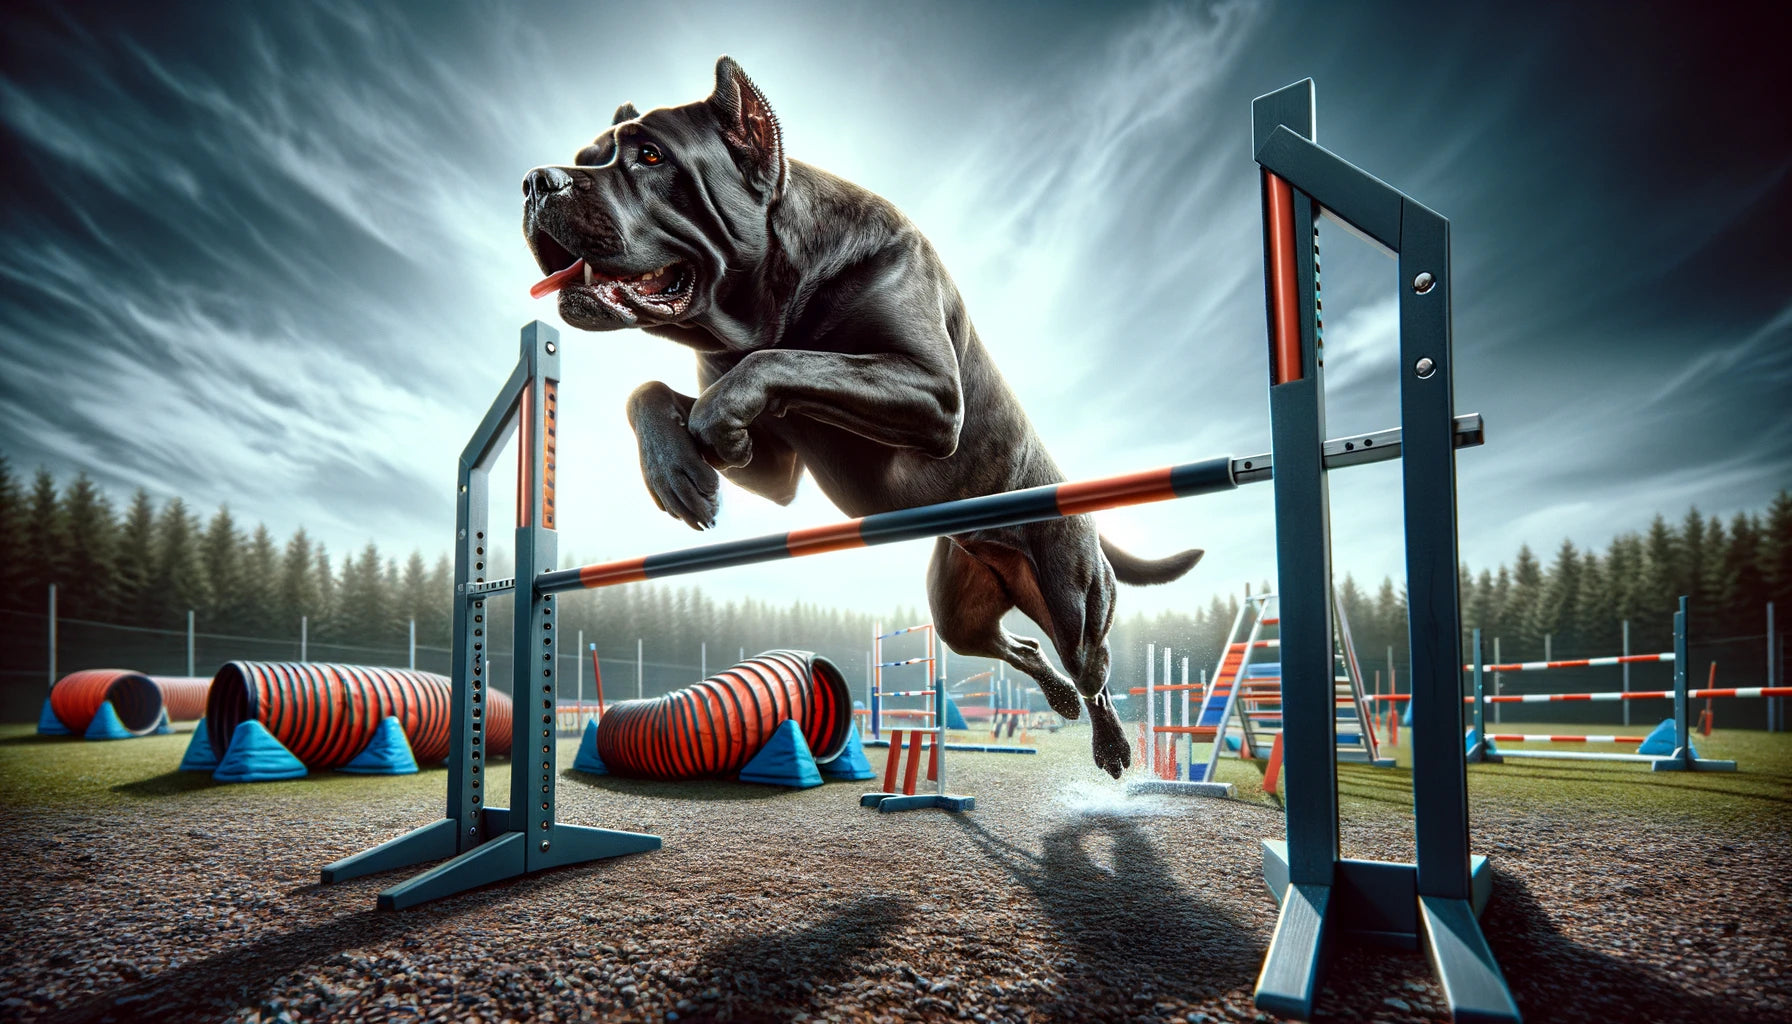 Cane Corso engaging in agility training, navigating through an obstacle course that includes jump.